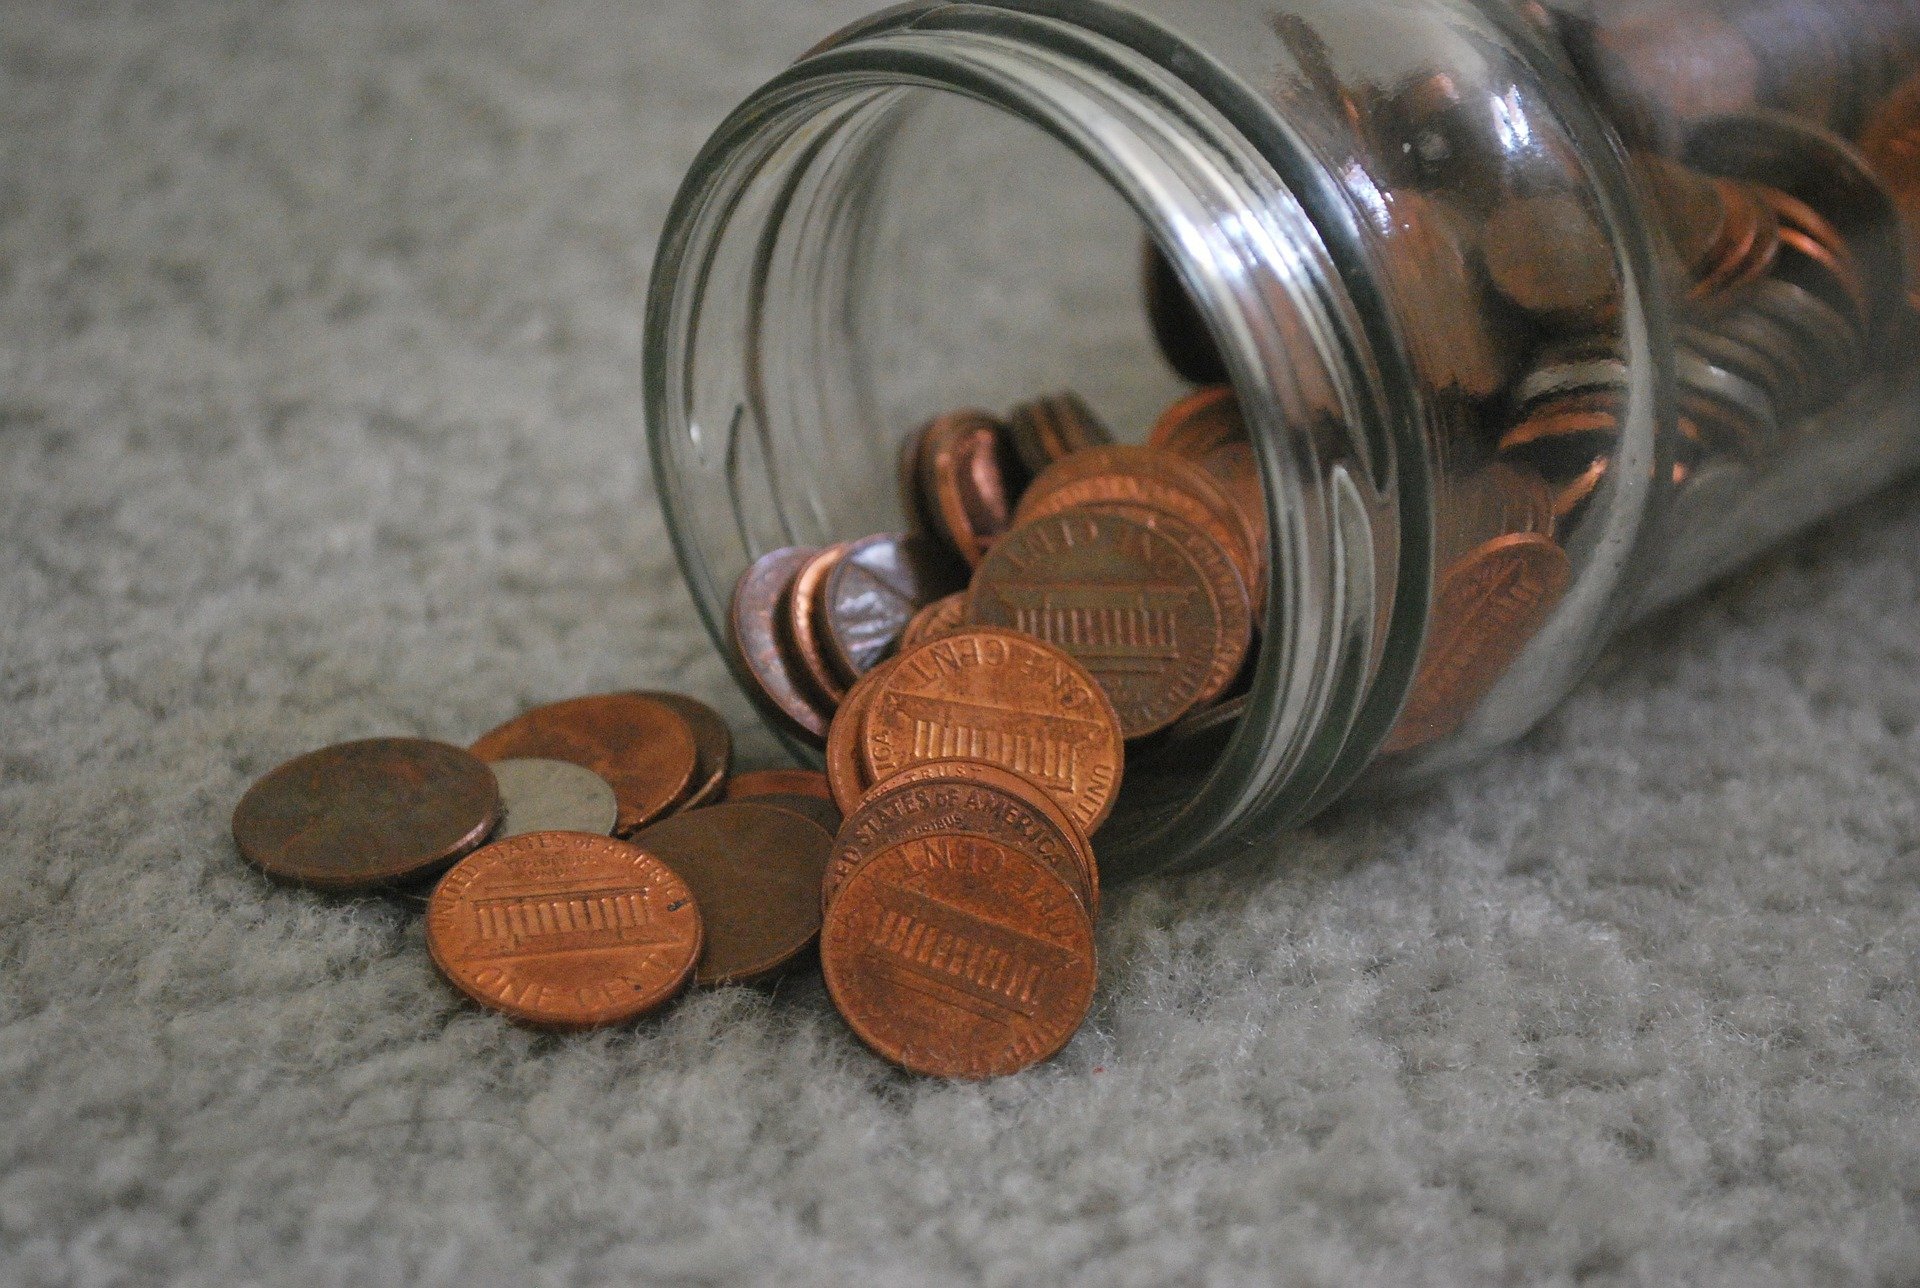 A jar of pennies spilling on to a carpet. | Photo: Pixabay/PublicDomainPictures